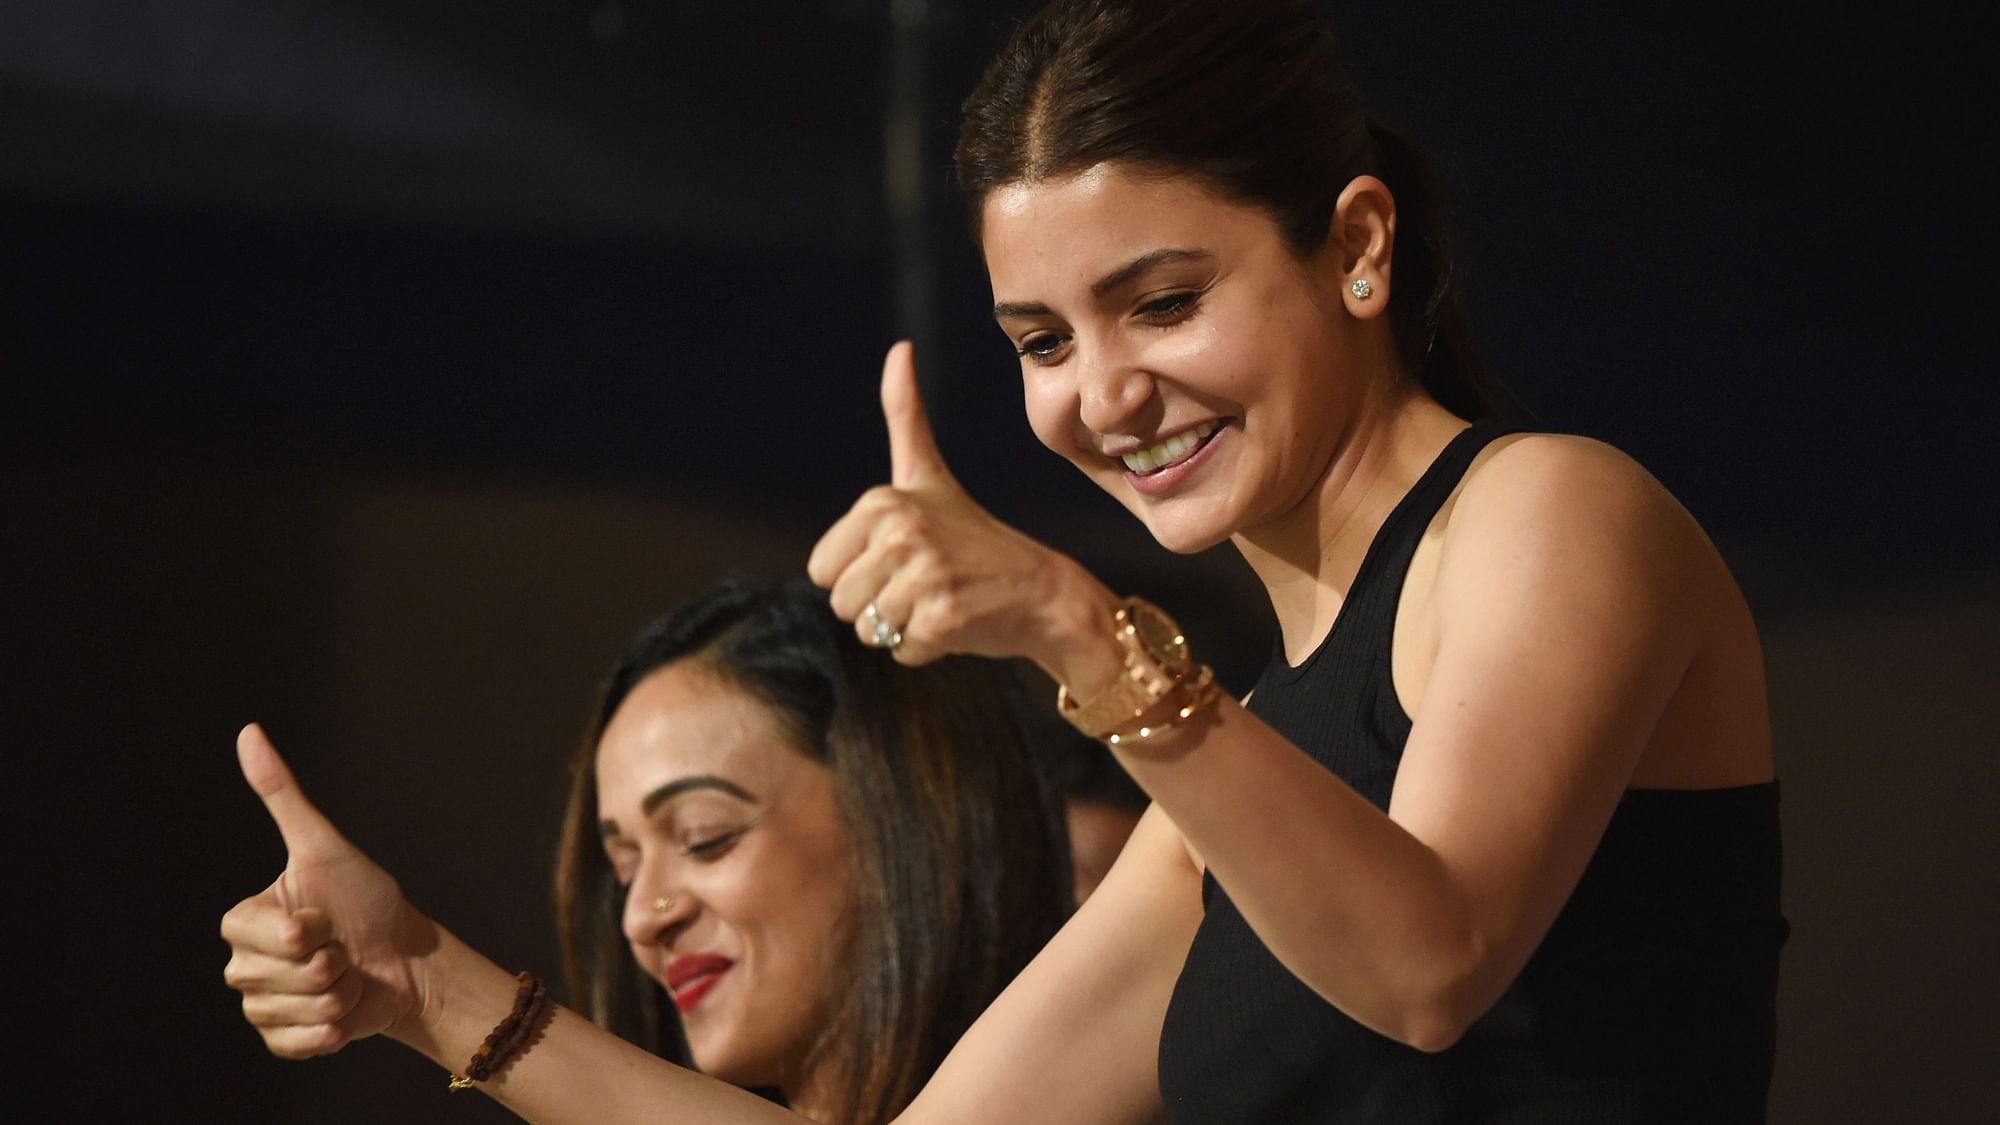 Anushka Sharma’s colleagues from the Bollywood film industry have applauded the actresses comments.